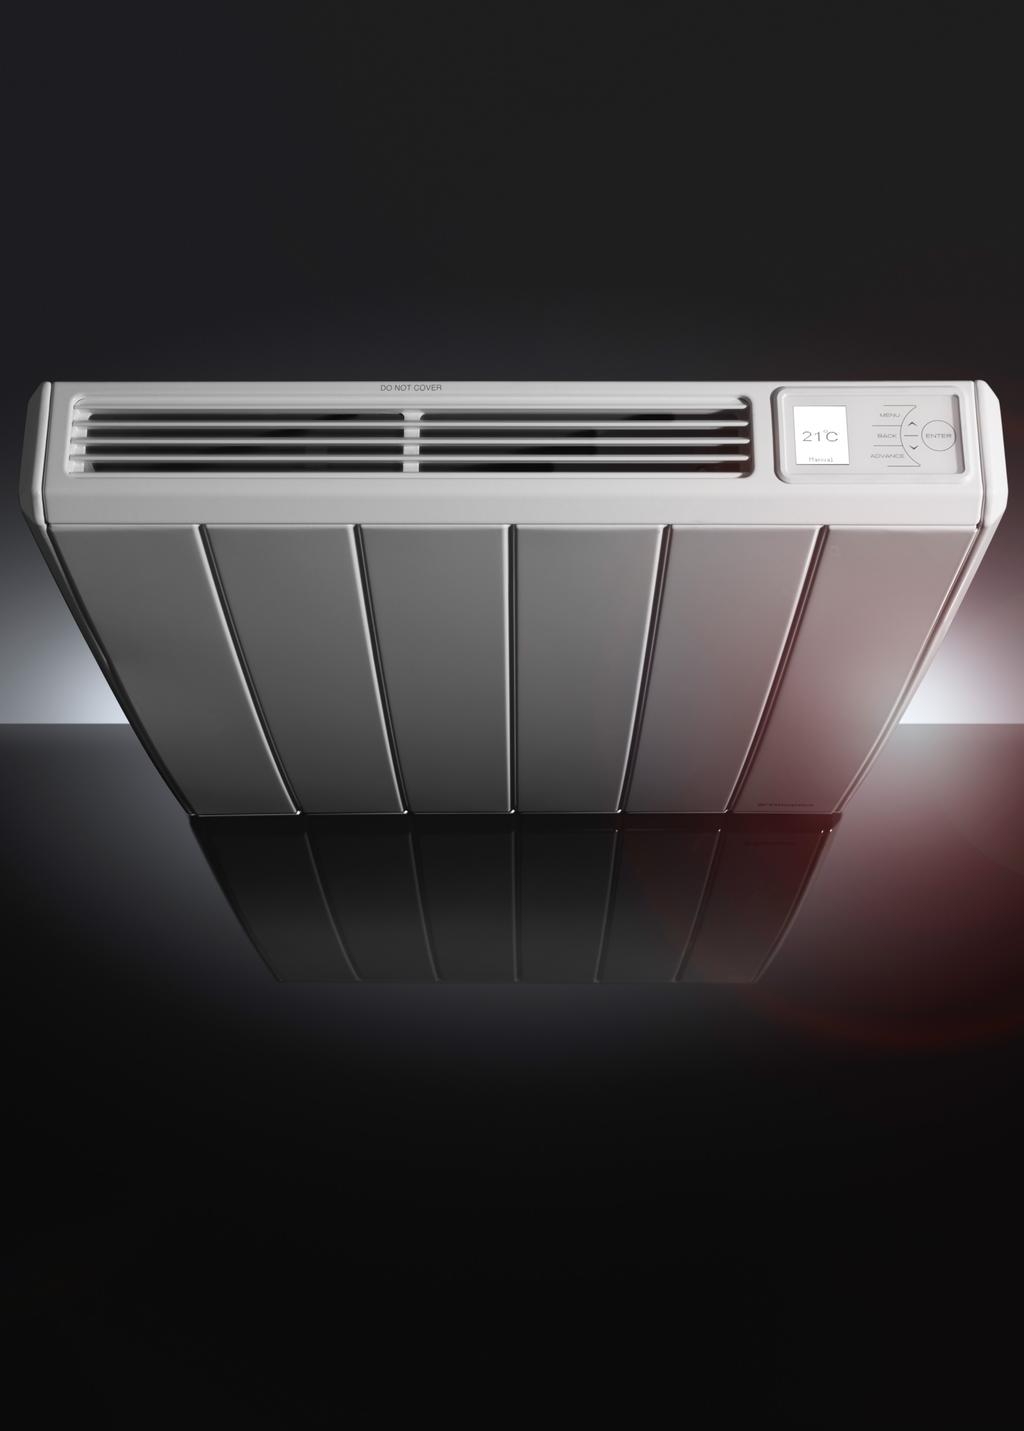 Introducing Q-Rad our most intelligent electric radiator to date.